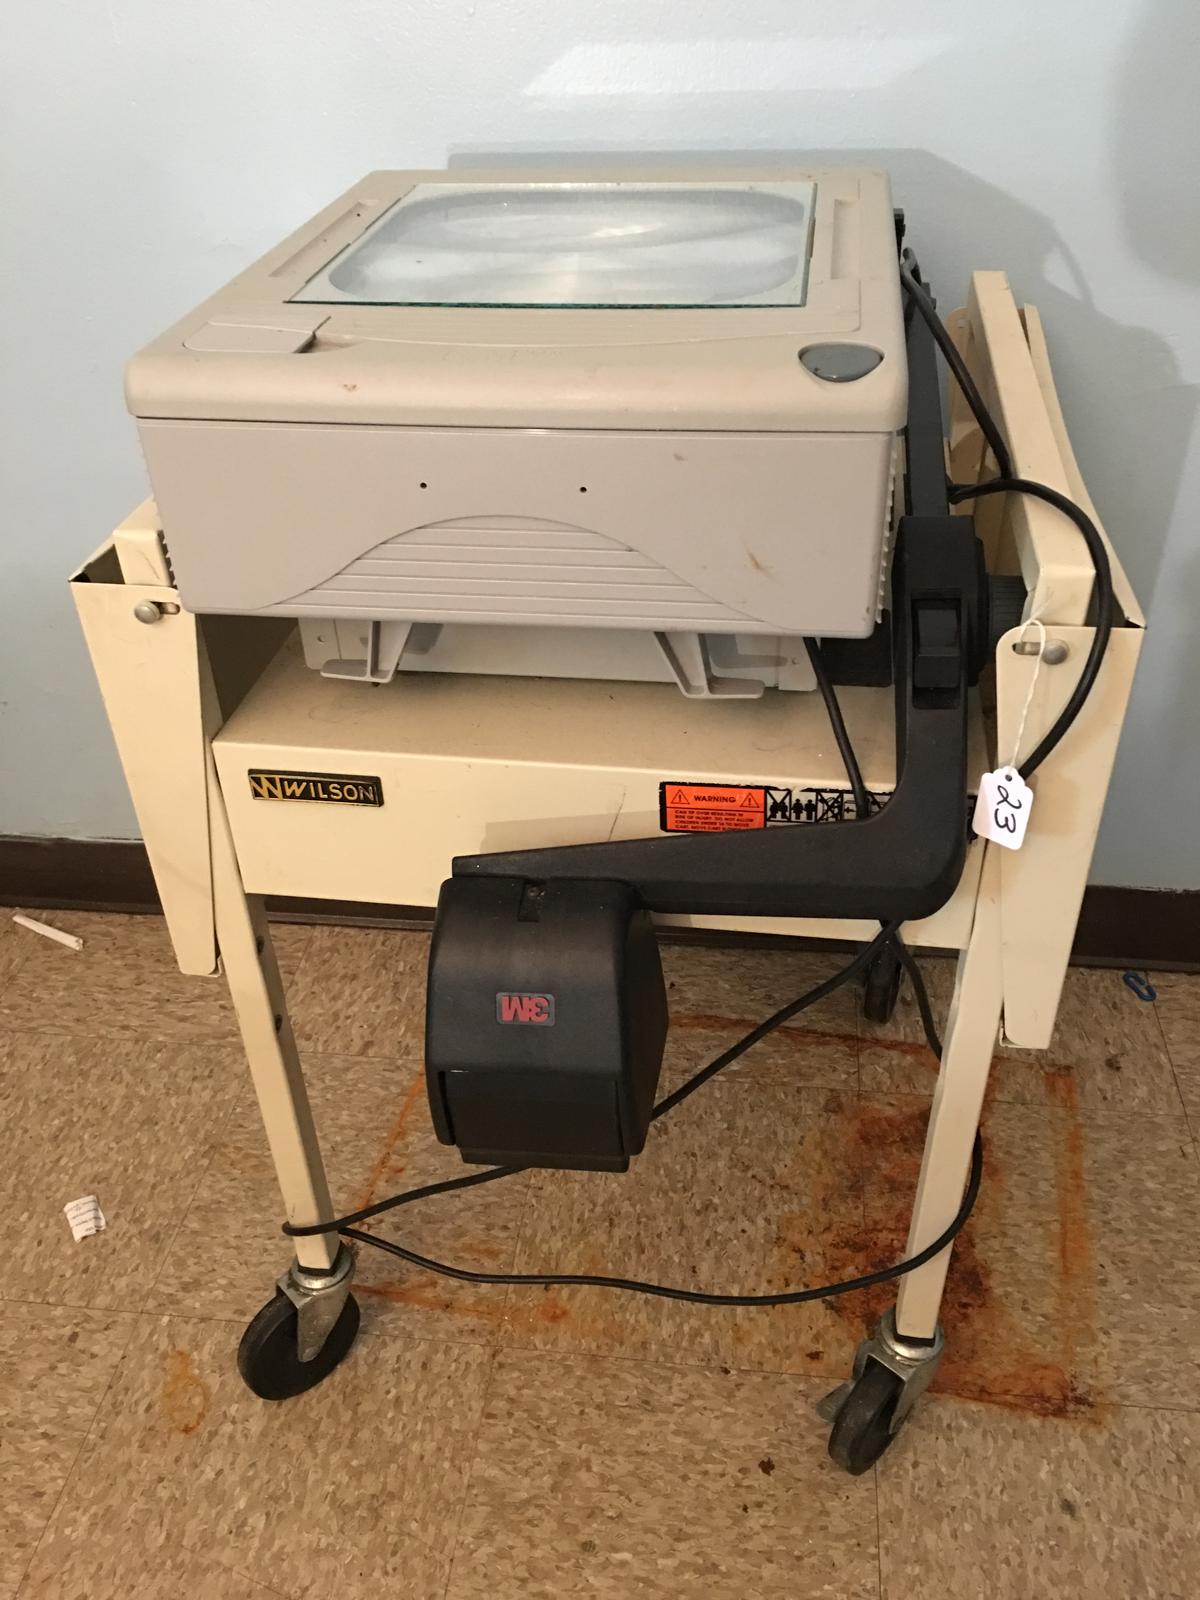 3-M Overhead Projector On Wheeled Cart, Cafeteria